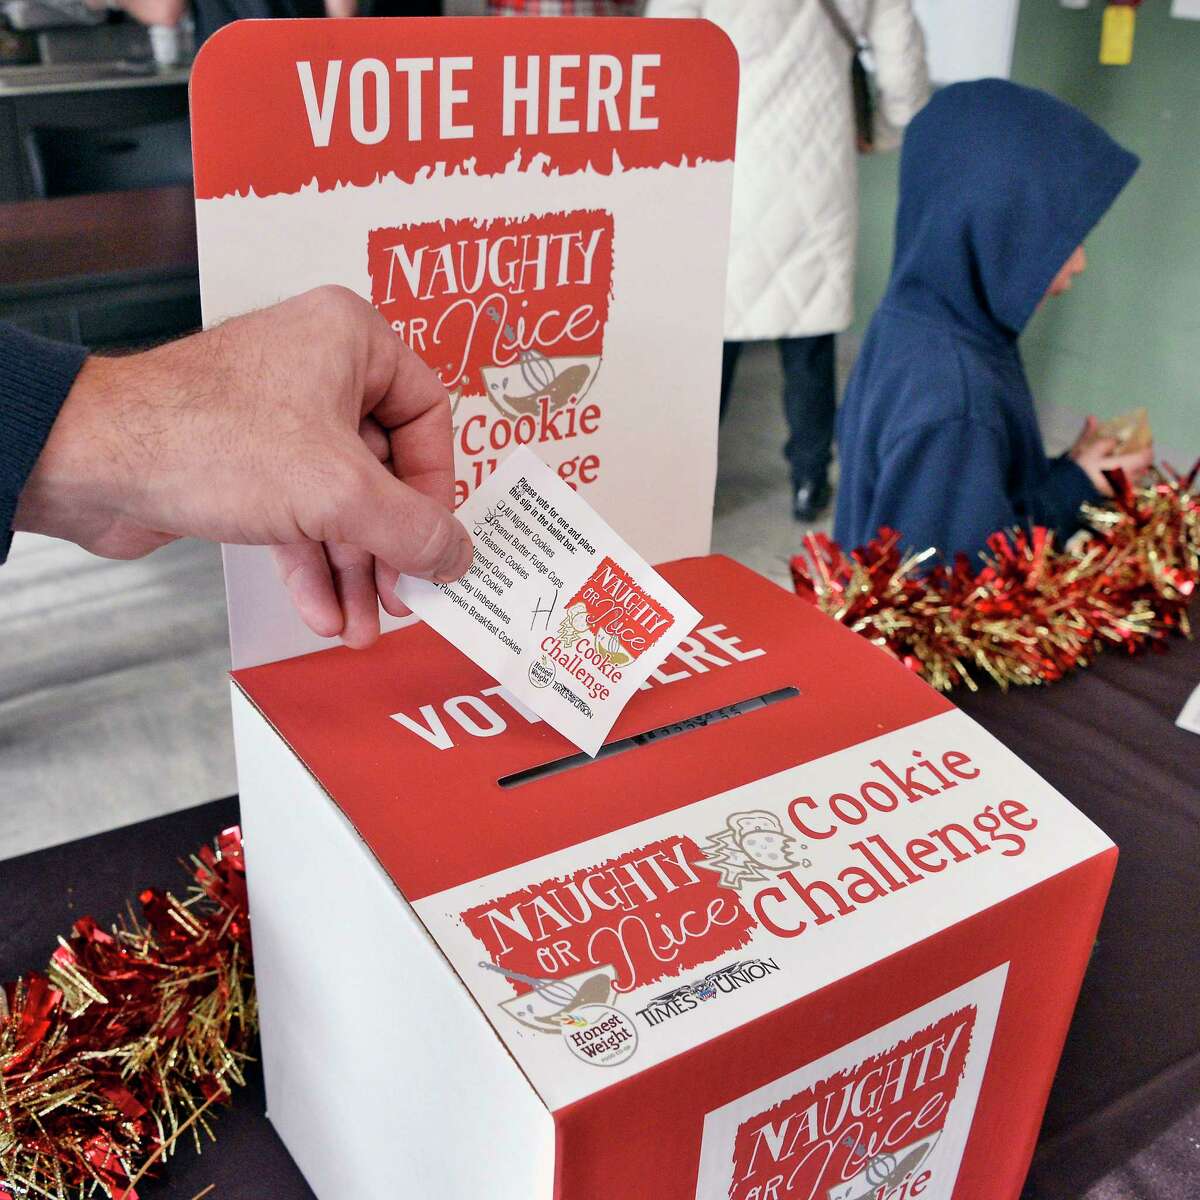 Participants cast their ballots during the Naughty or Nice Cookie Challenge at Honest Weight Food Co-op Saturday Dec. 1, 2018 in Albany, NY. (John Carl D'Annibale/Times Union)